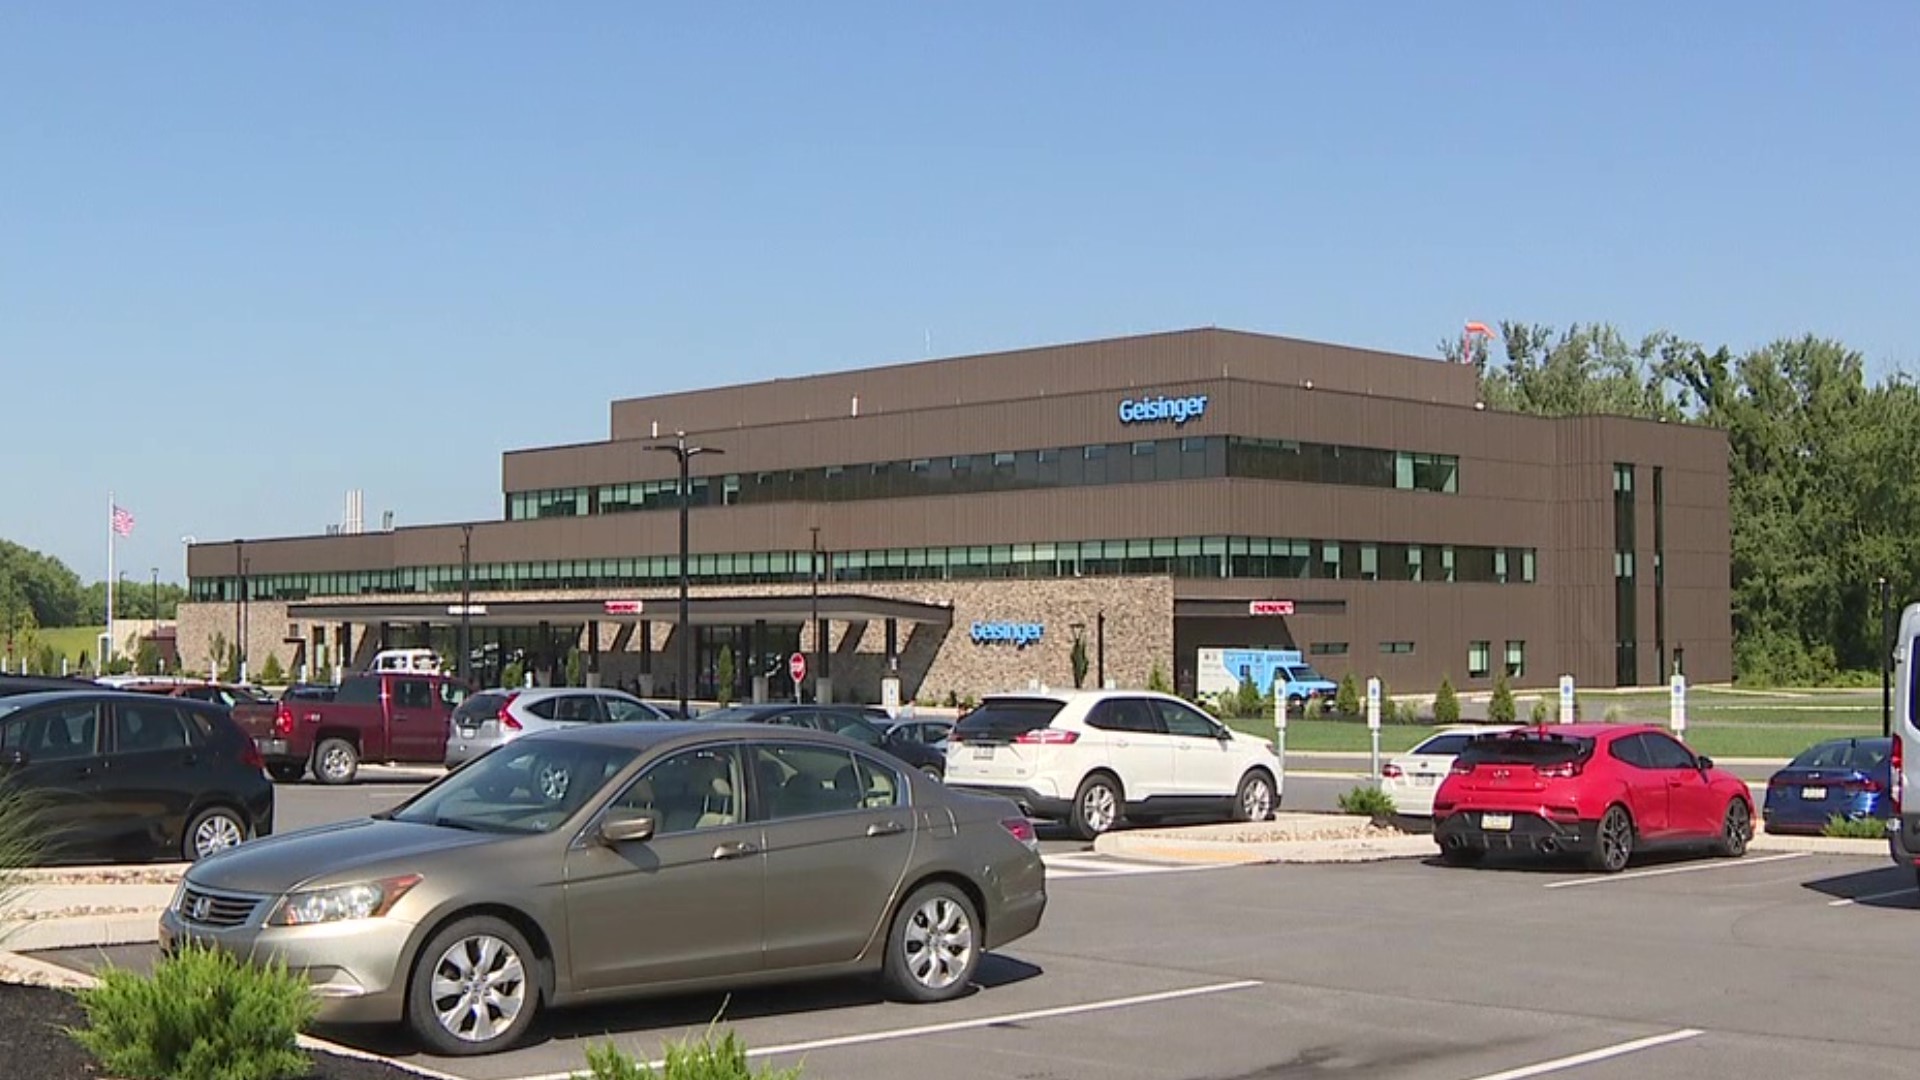 A woman from Montoursville had the first joint replacement surgery at the new hospital.